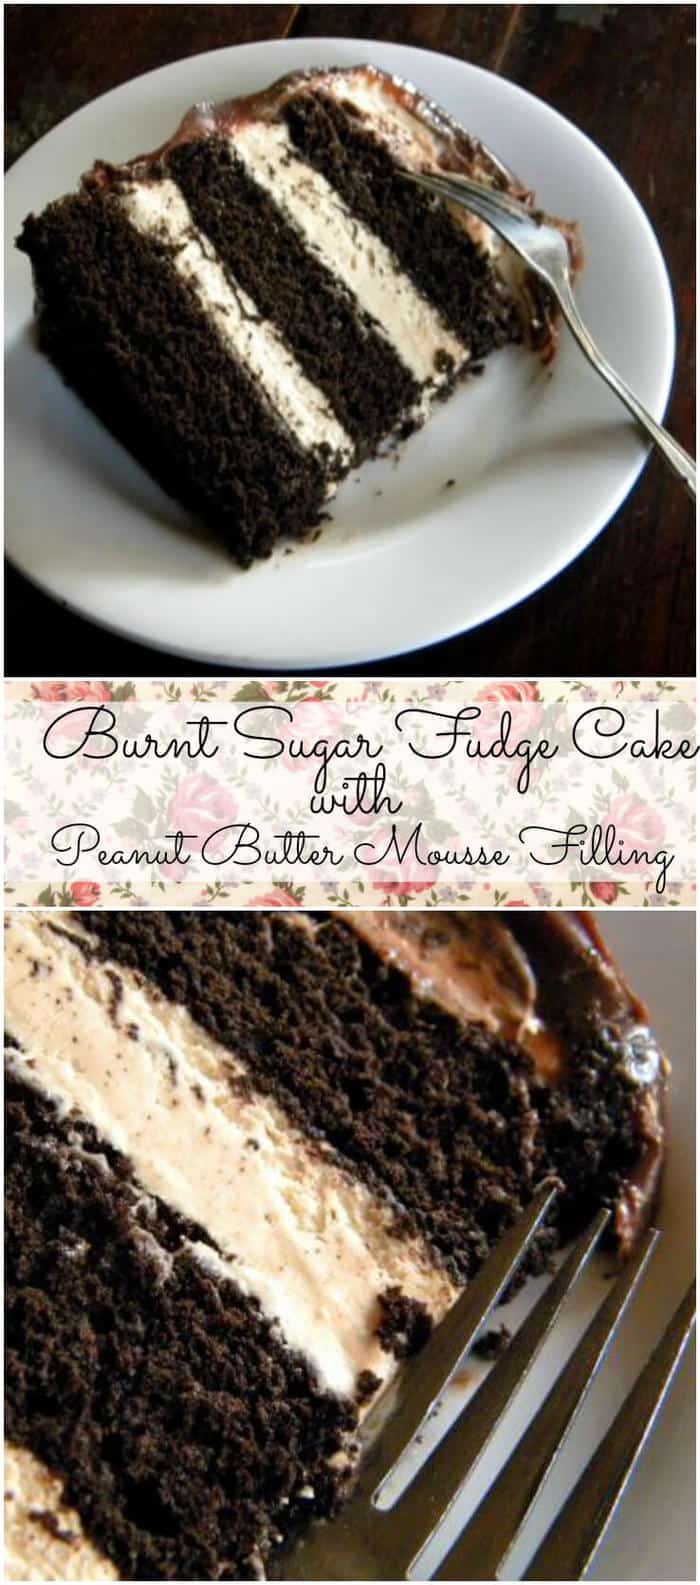 Burnt Sugar Fudge Cake is an old fashioned chocolate cake with a drift of silky peanut butter mousse between each tender layer. From RestlessChipotle.com